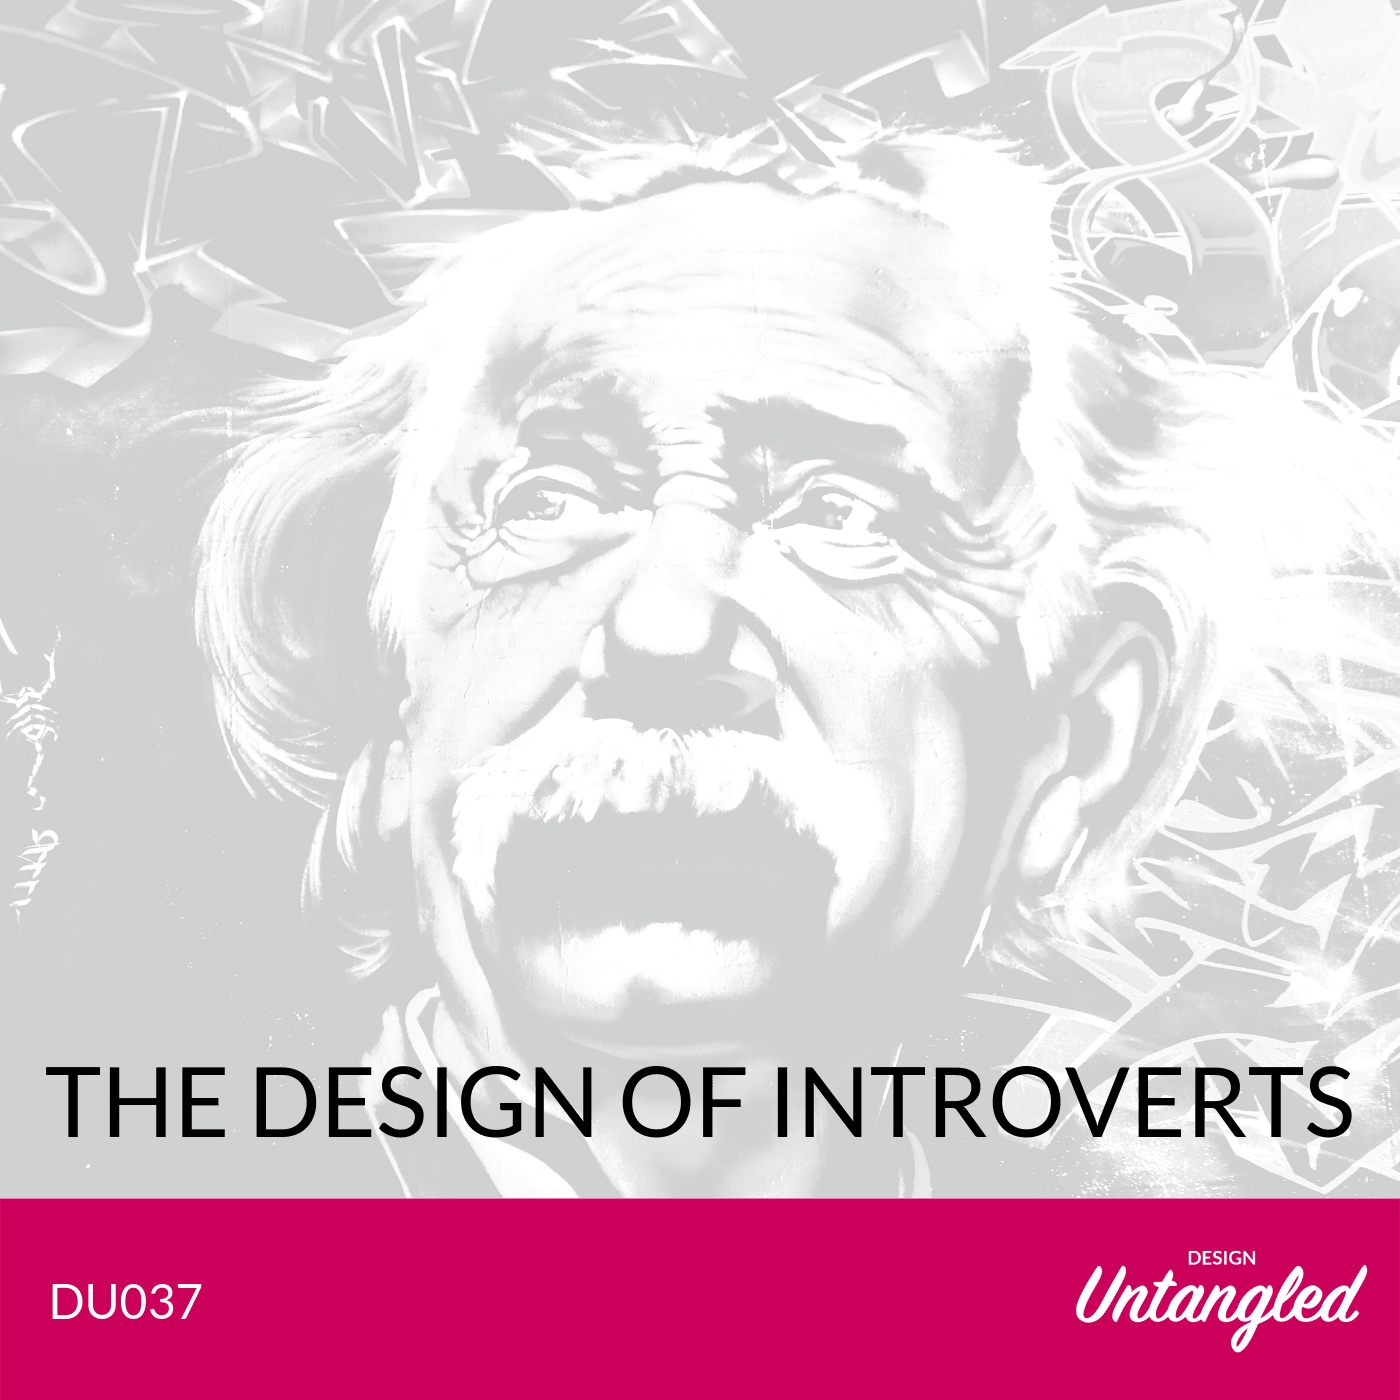 DU037 – The Design of Introverts